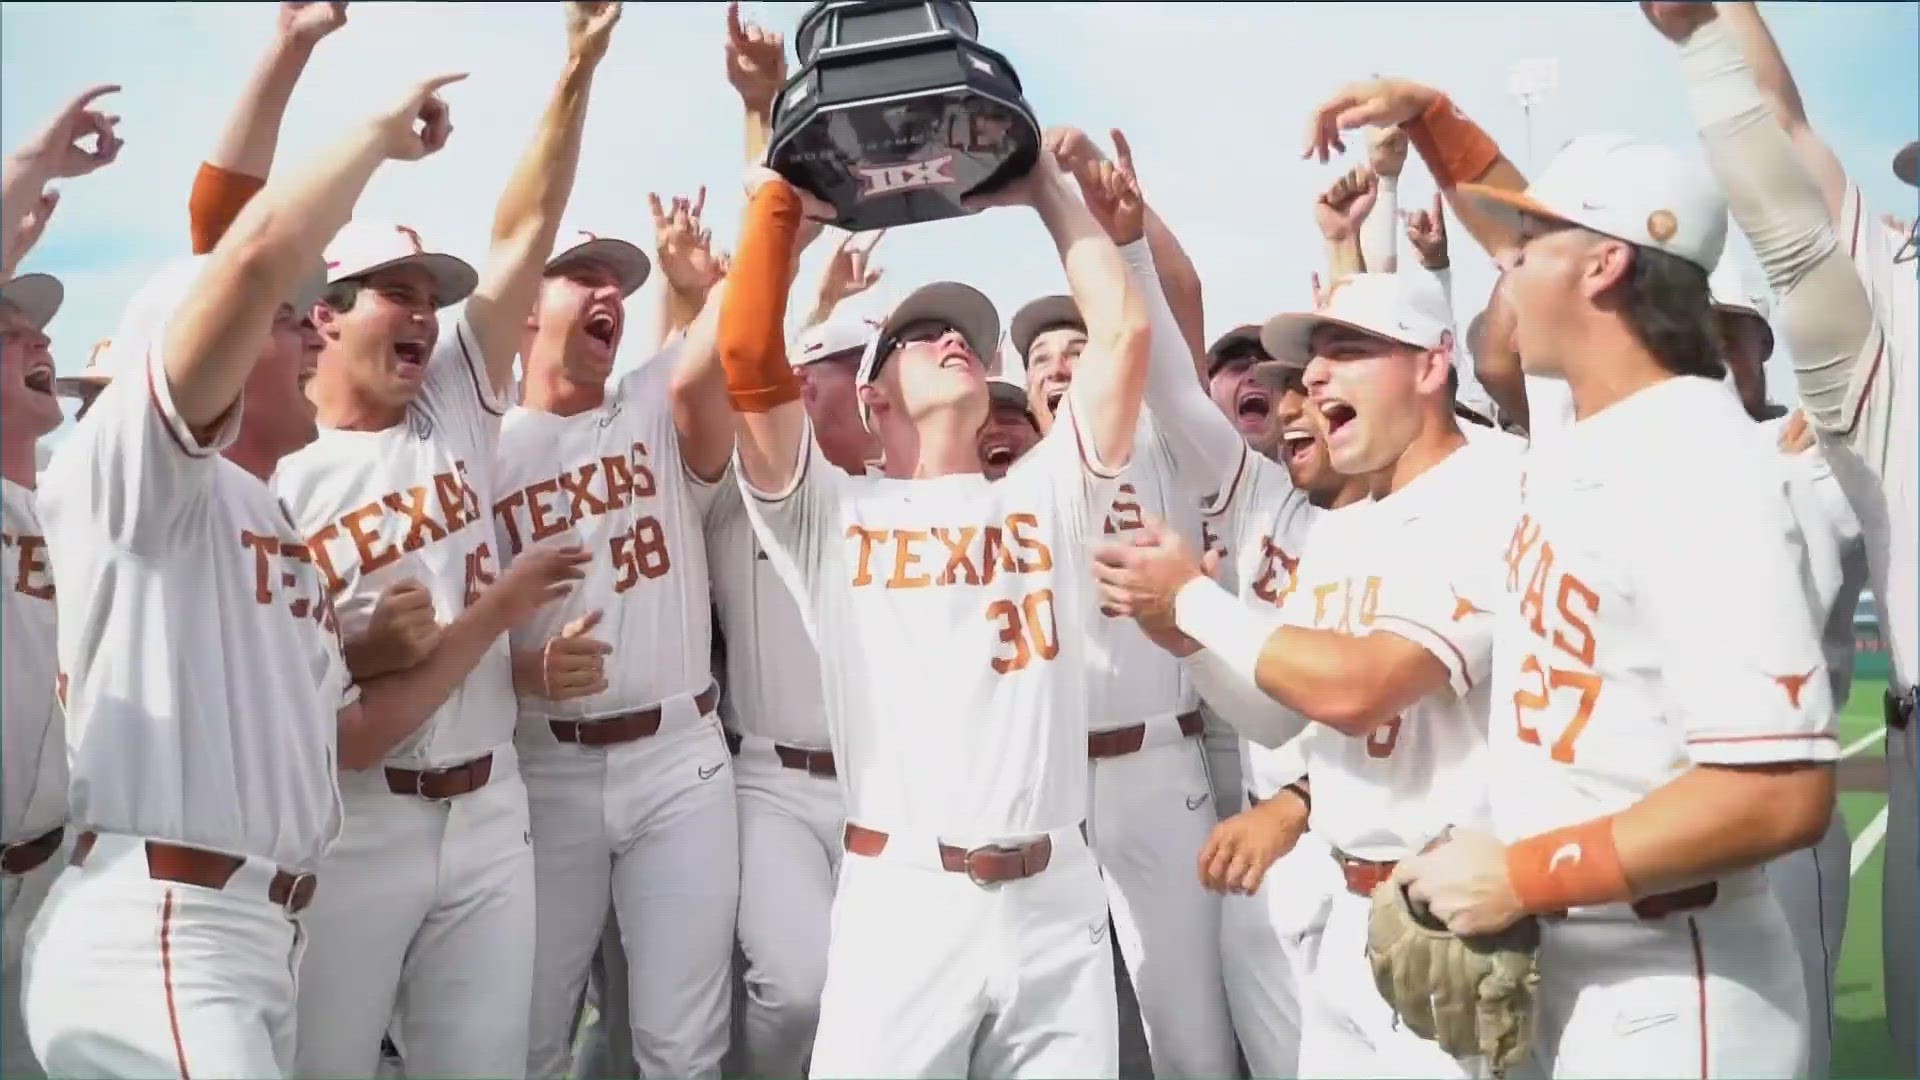 The Longhorns will be the top seed in the upcoming Big 12 Tournament.